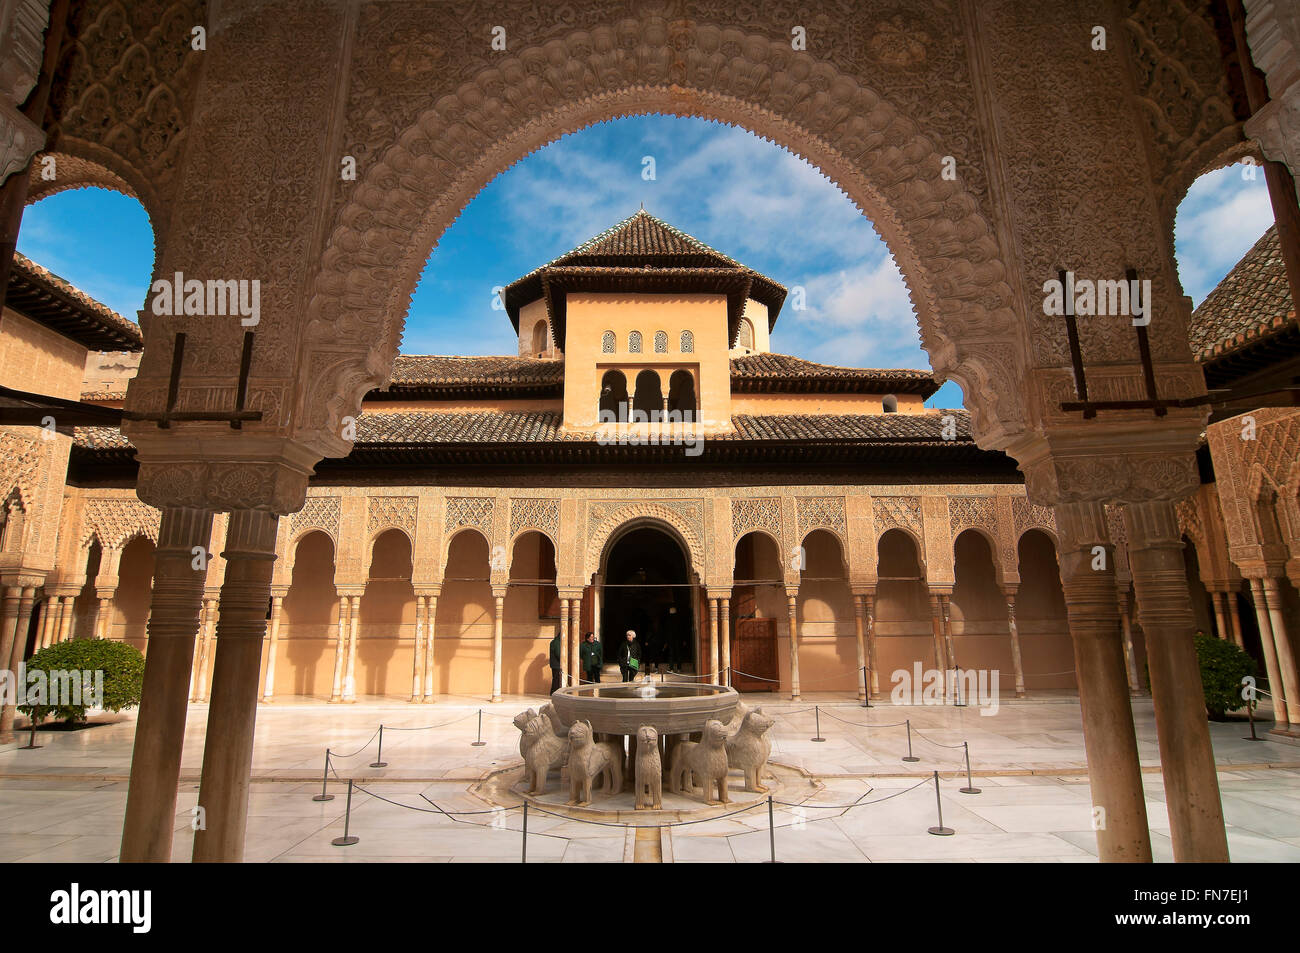 The Lions Courtyard, The Alhambra, Granada, Region of Andalusia, Spain, Europe Stock Photo